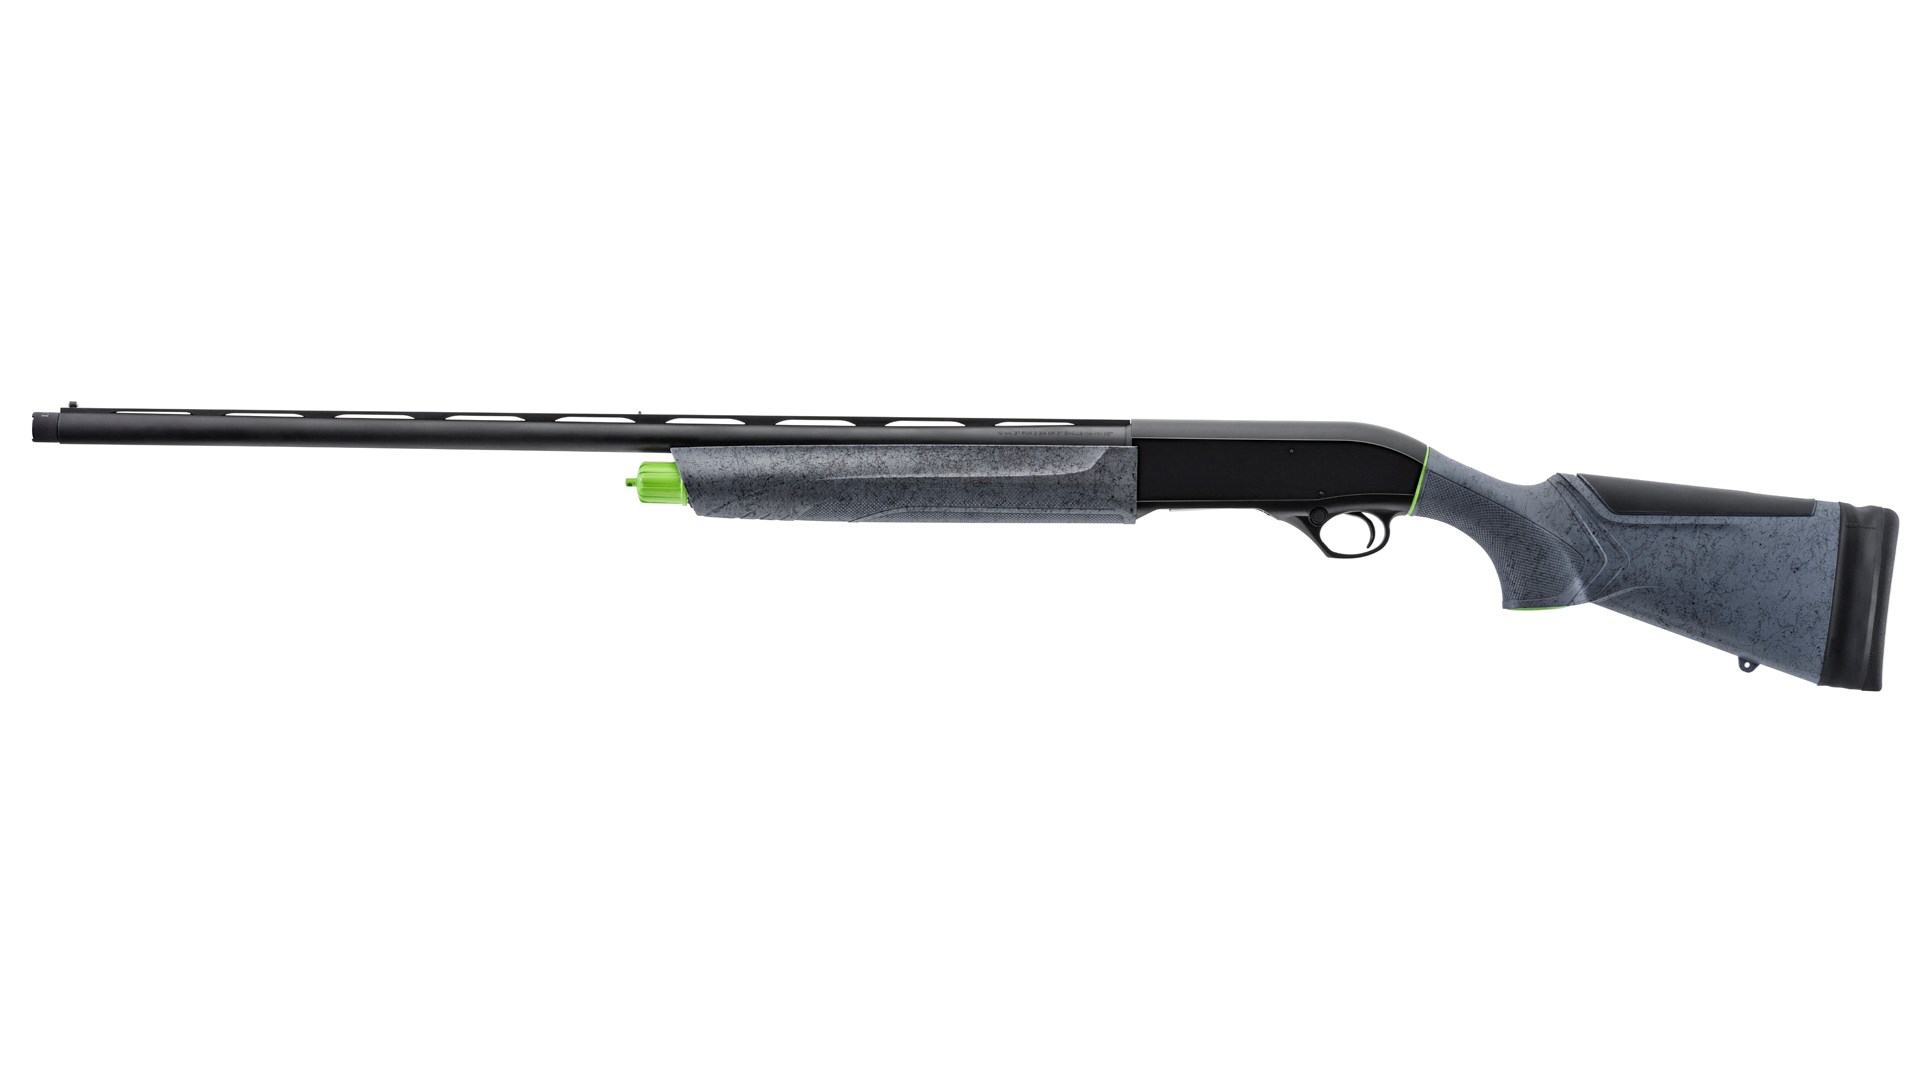 Left side of the Beretta A300 Ultima Sporting shotgun shown on a white background.